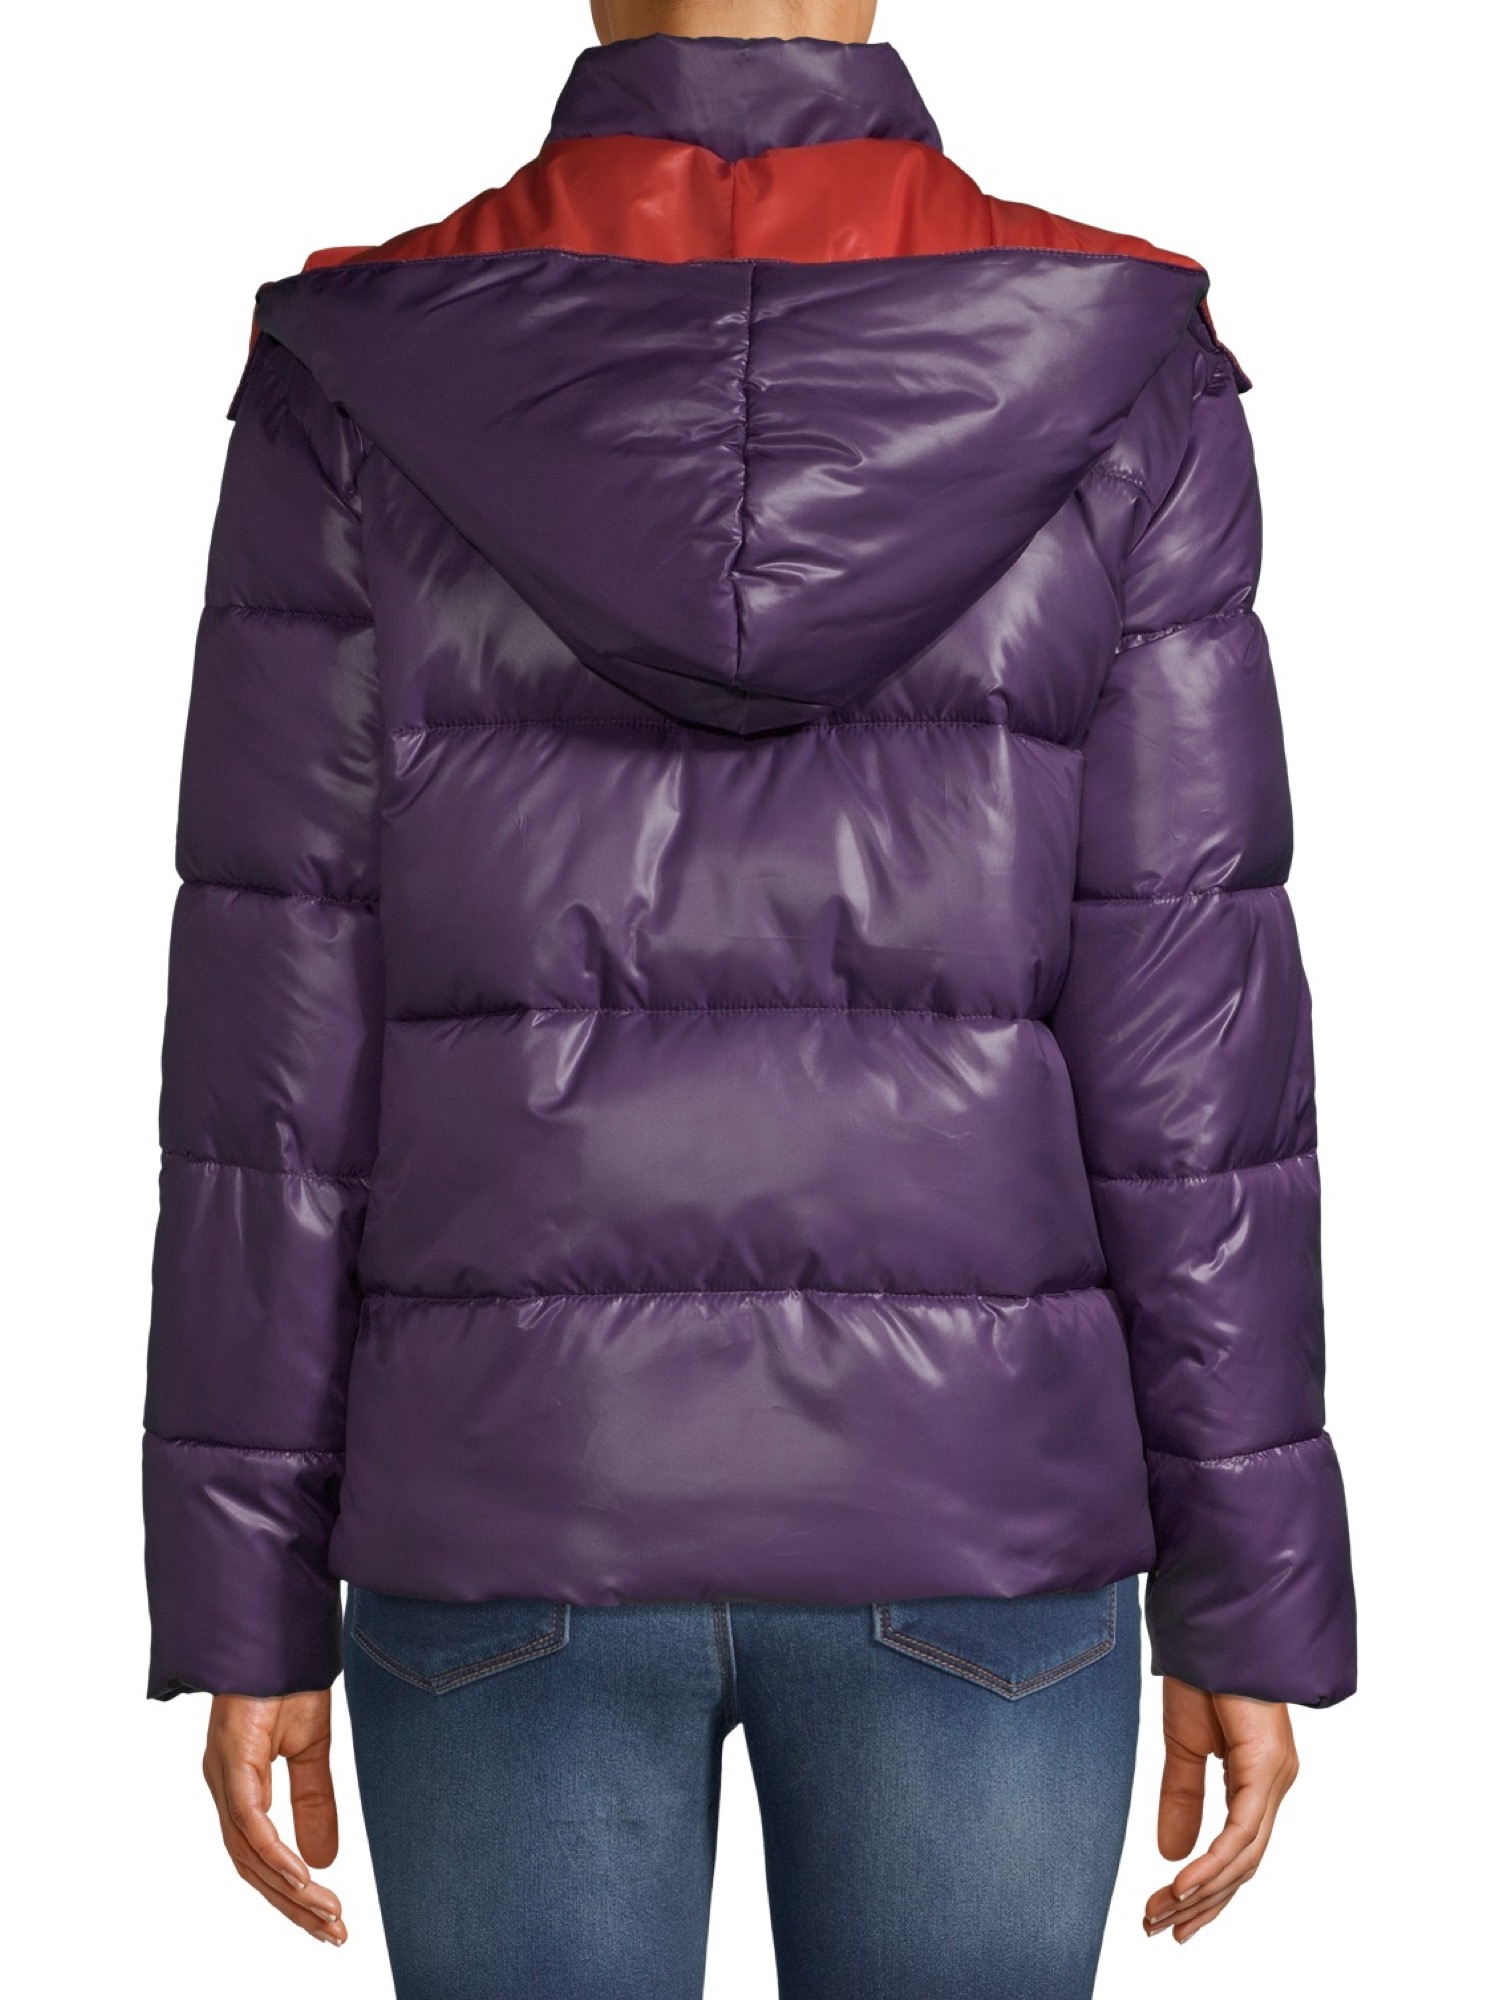 Kendall + Kylie Women's Two Tone Puffer - image 3 of 6